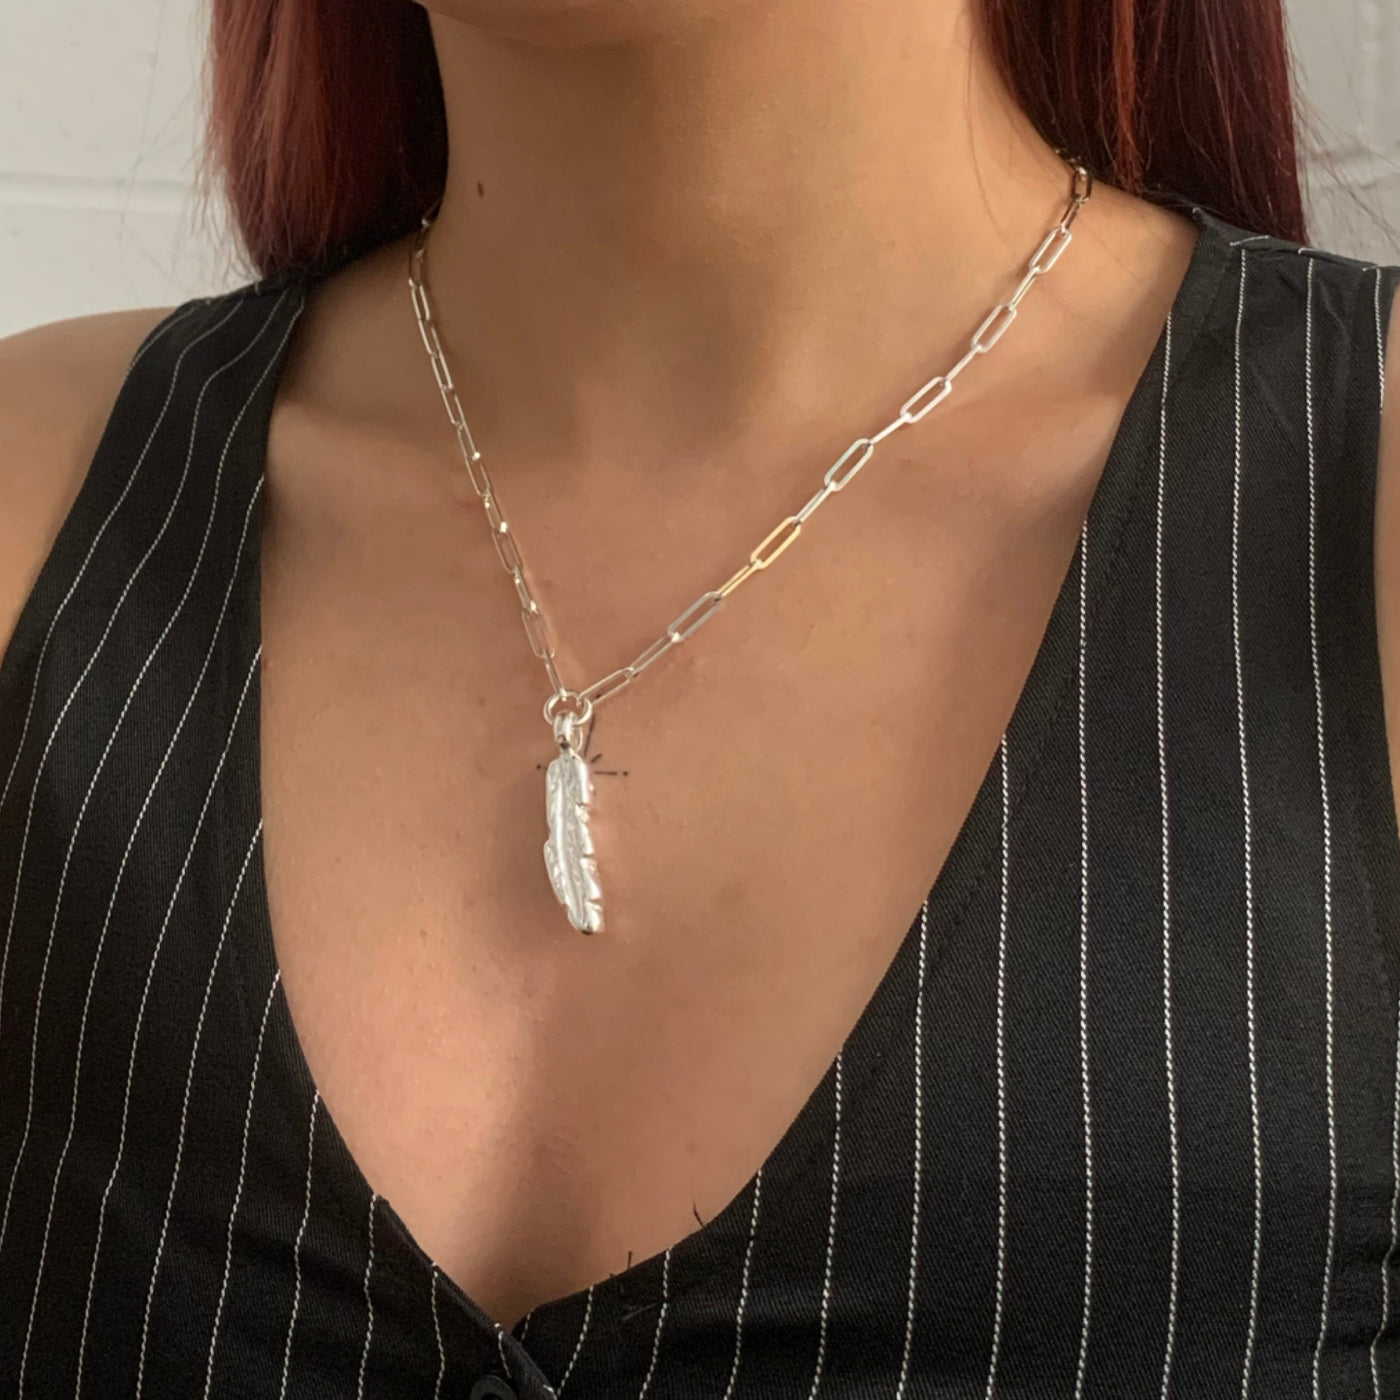 Handmade Solid sterling silver leaf charm on a recycled silver trace chain necklace from SilverBoo Jewellery In Lincolnshire